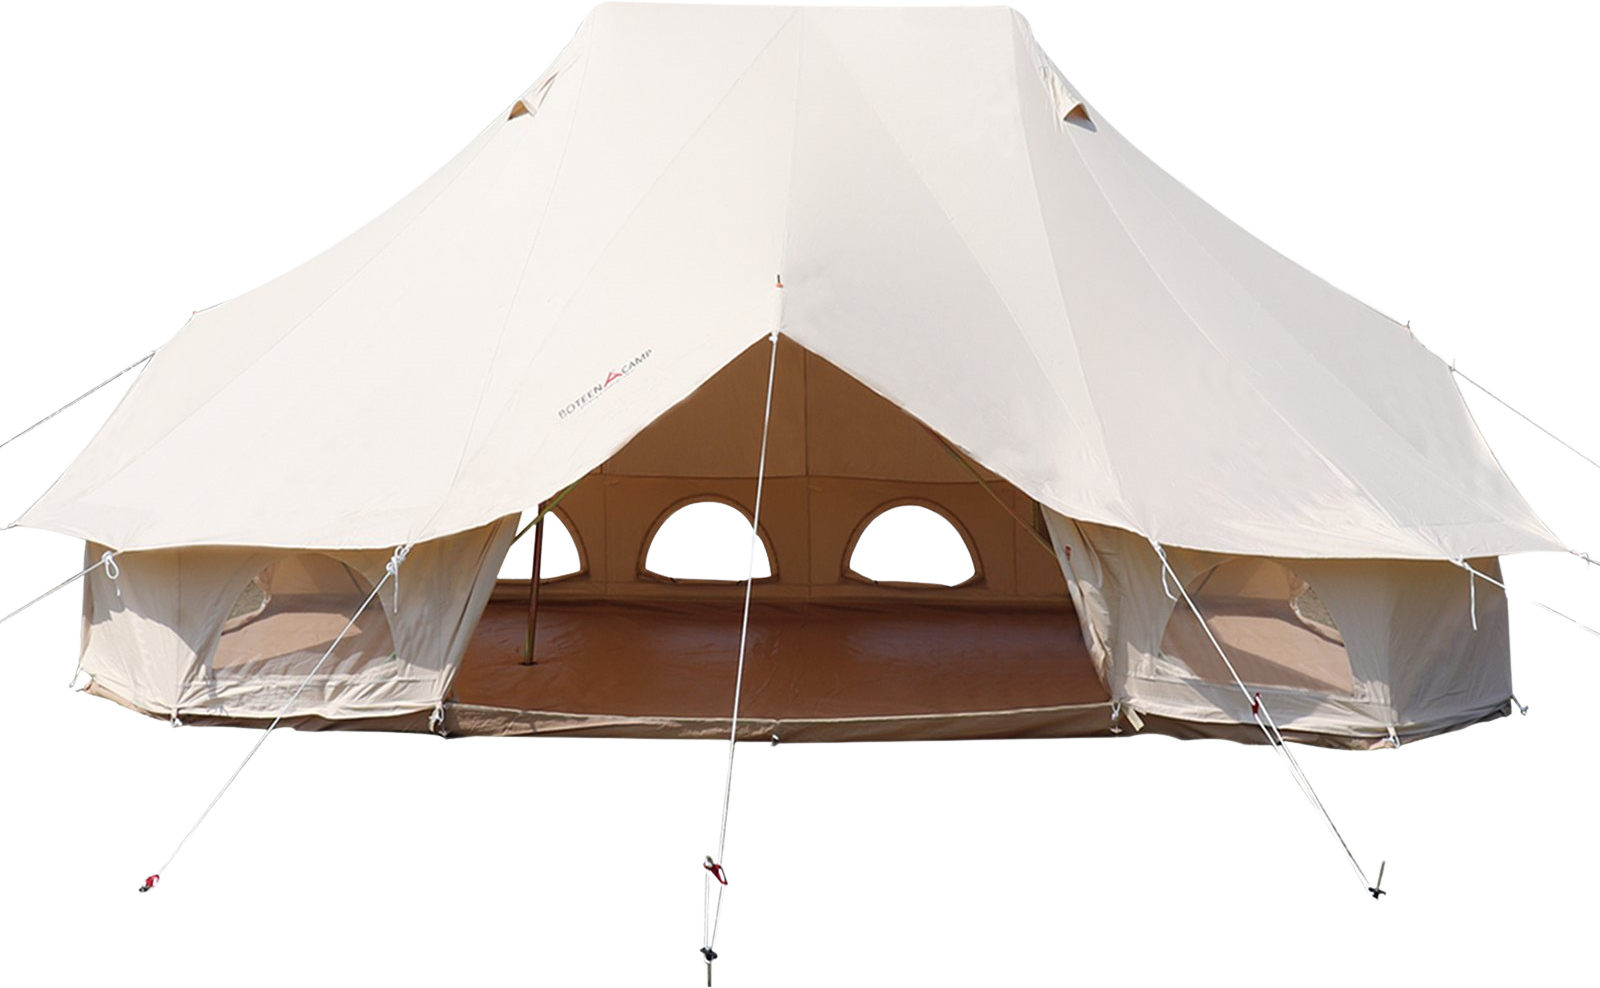 Vevor 6M Bell Tent 19.7' x 13.1' x 9.8' Yurt Beige Canvas Cotton For 8-12 People Portable 4 Season Teepee New